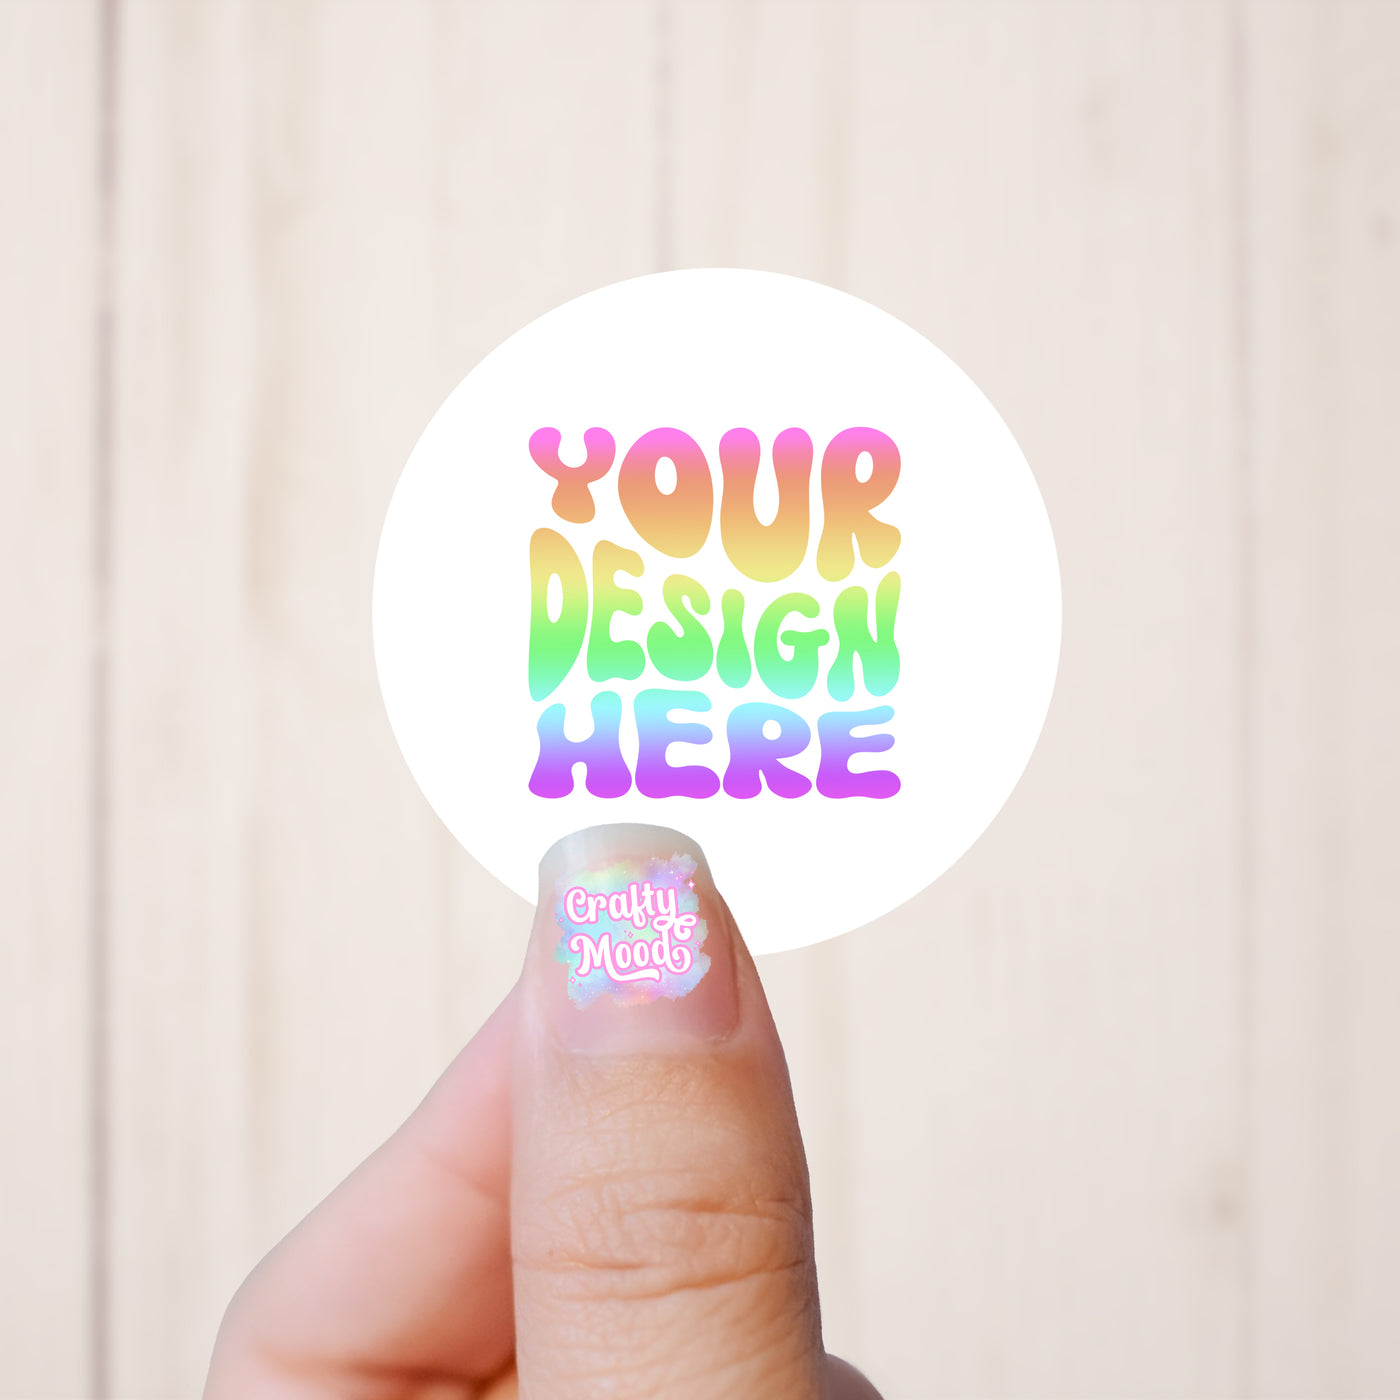 ROUND - PRINTED STICKERS CUSTOM LOGO LABELS BUSINESS